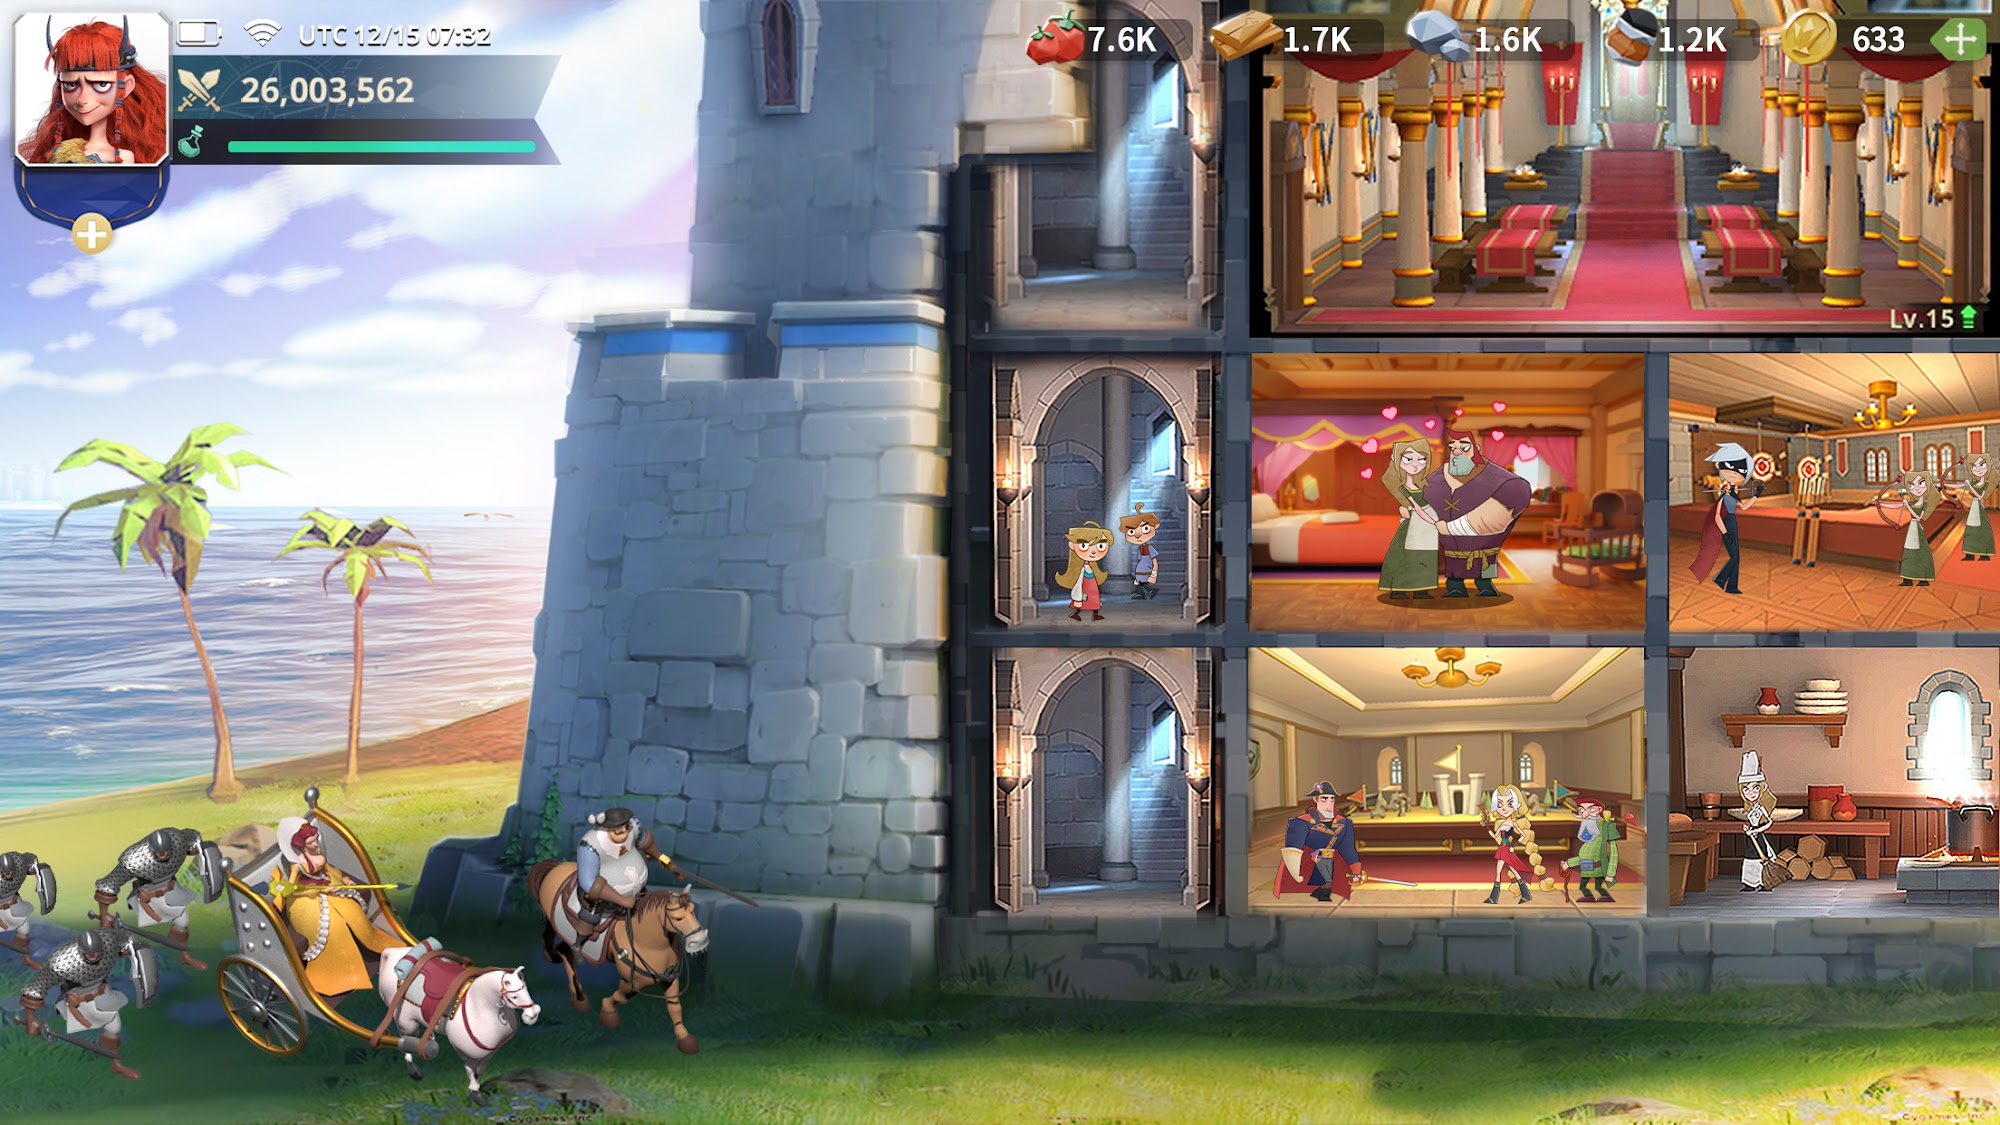 Castle Empire - Android game screenshots.